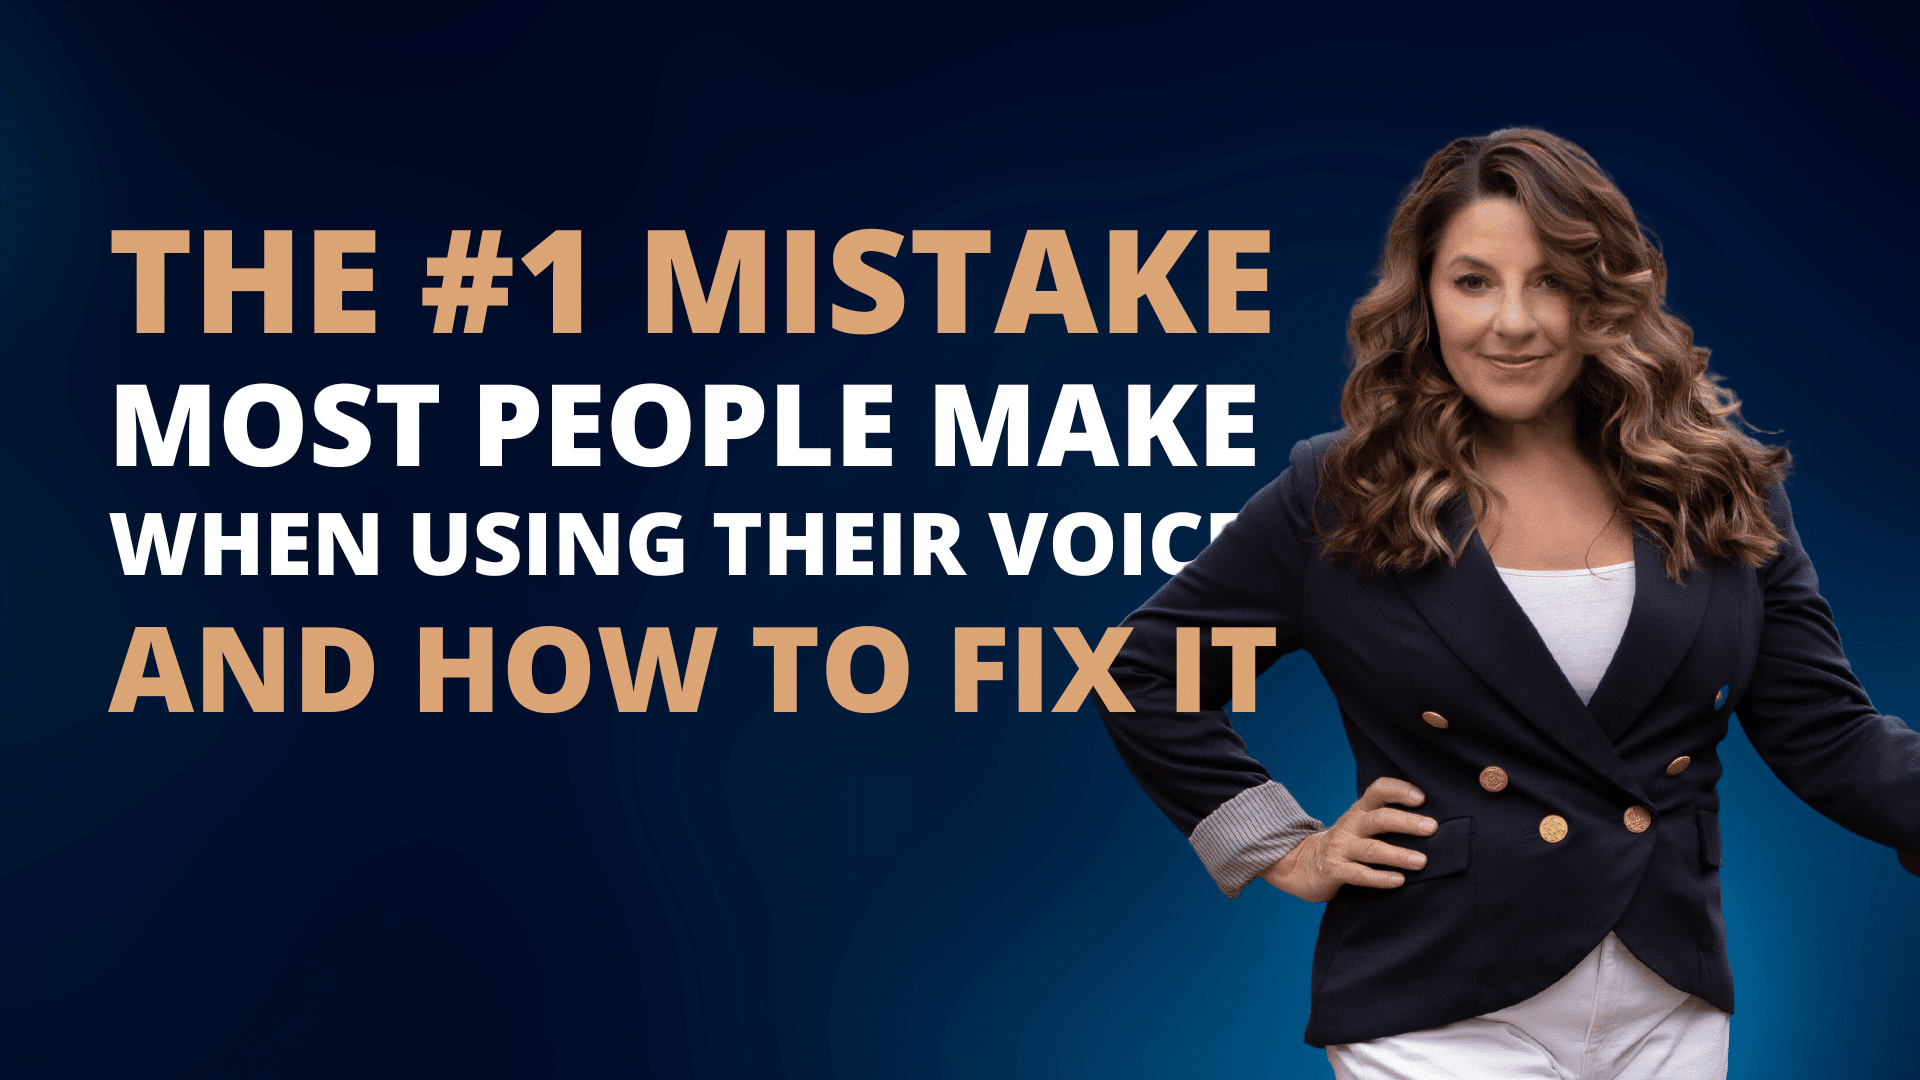 The #1 Mistake Most People Make When Using Their Voice